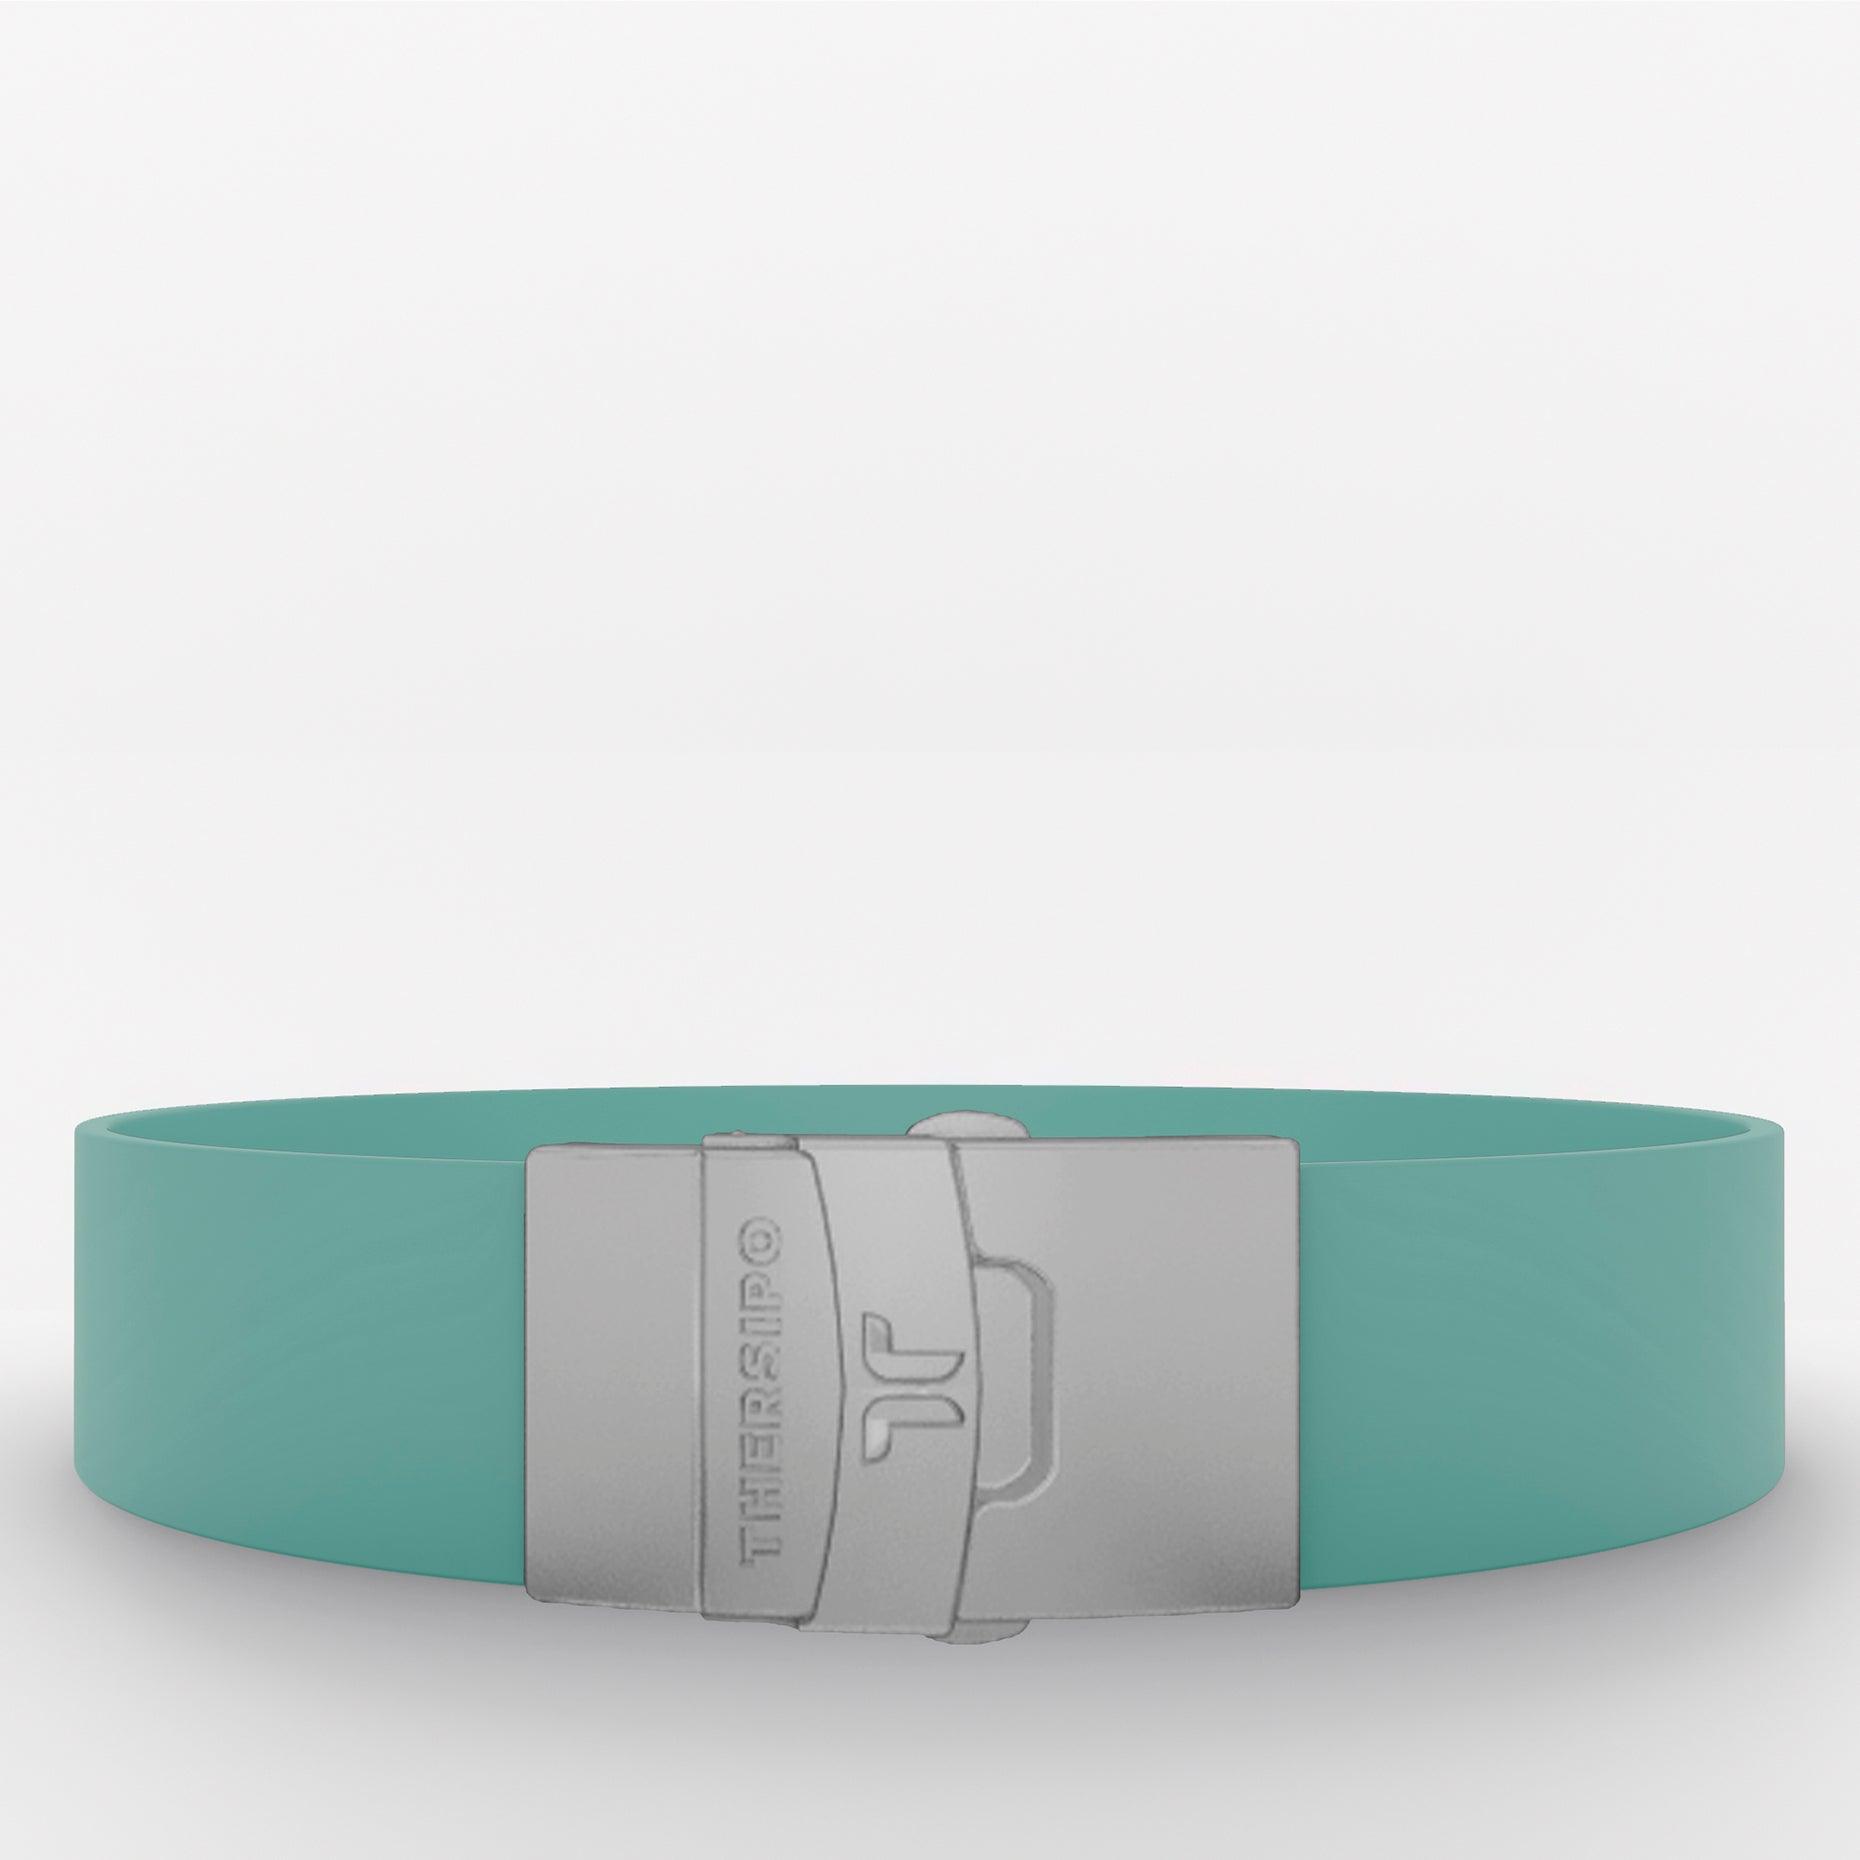 THERSIPO Band - Thersipo - Band - 13.1, 21k, 26.2mi, 42k, band, bracelet, Runners, Running - The perfect gift for marathon runners